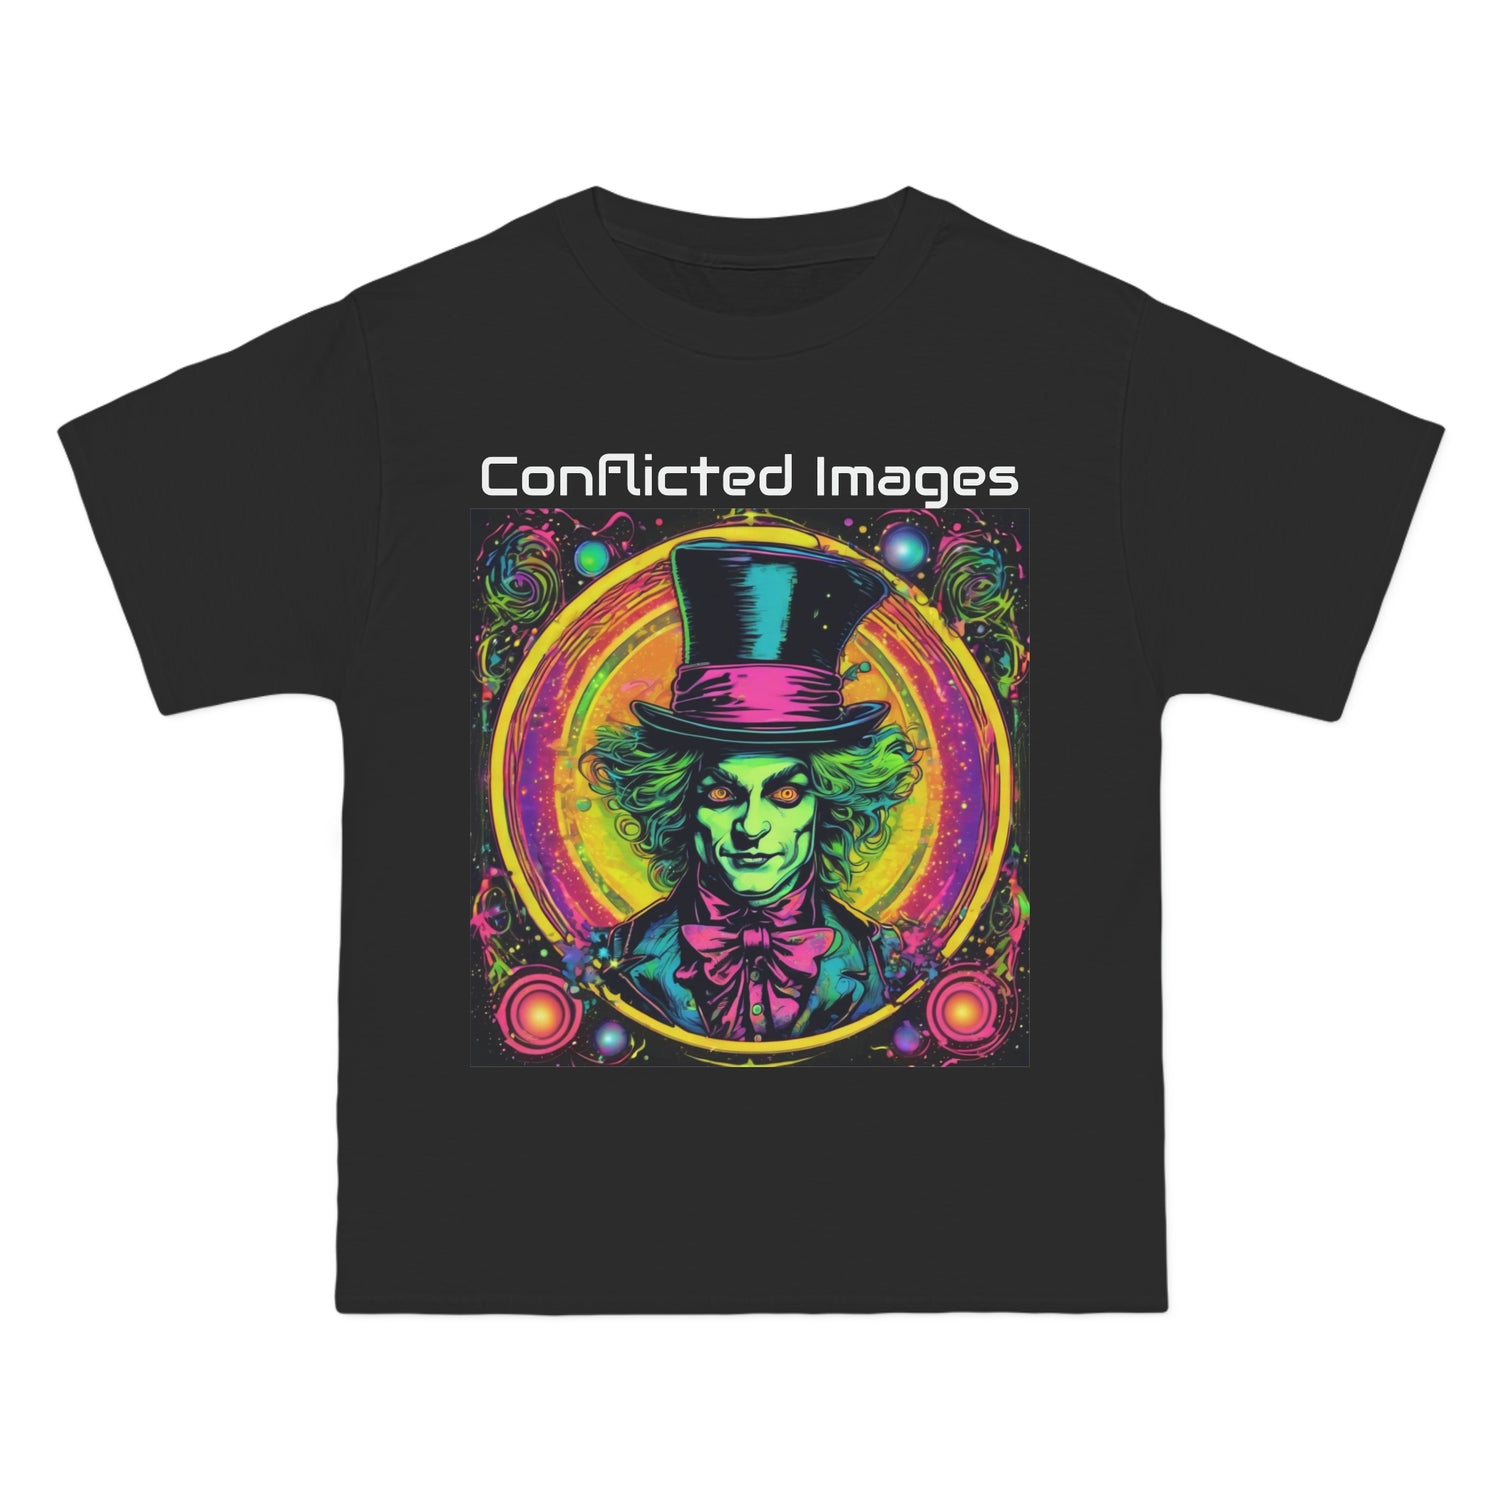 Conflicted Images Clothing